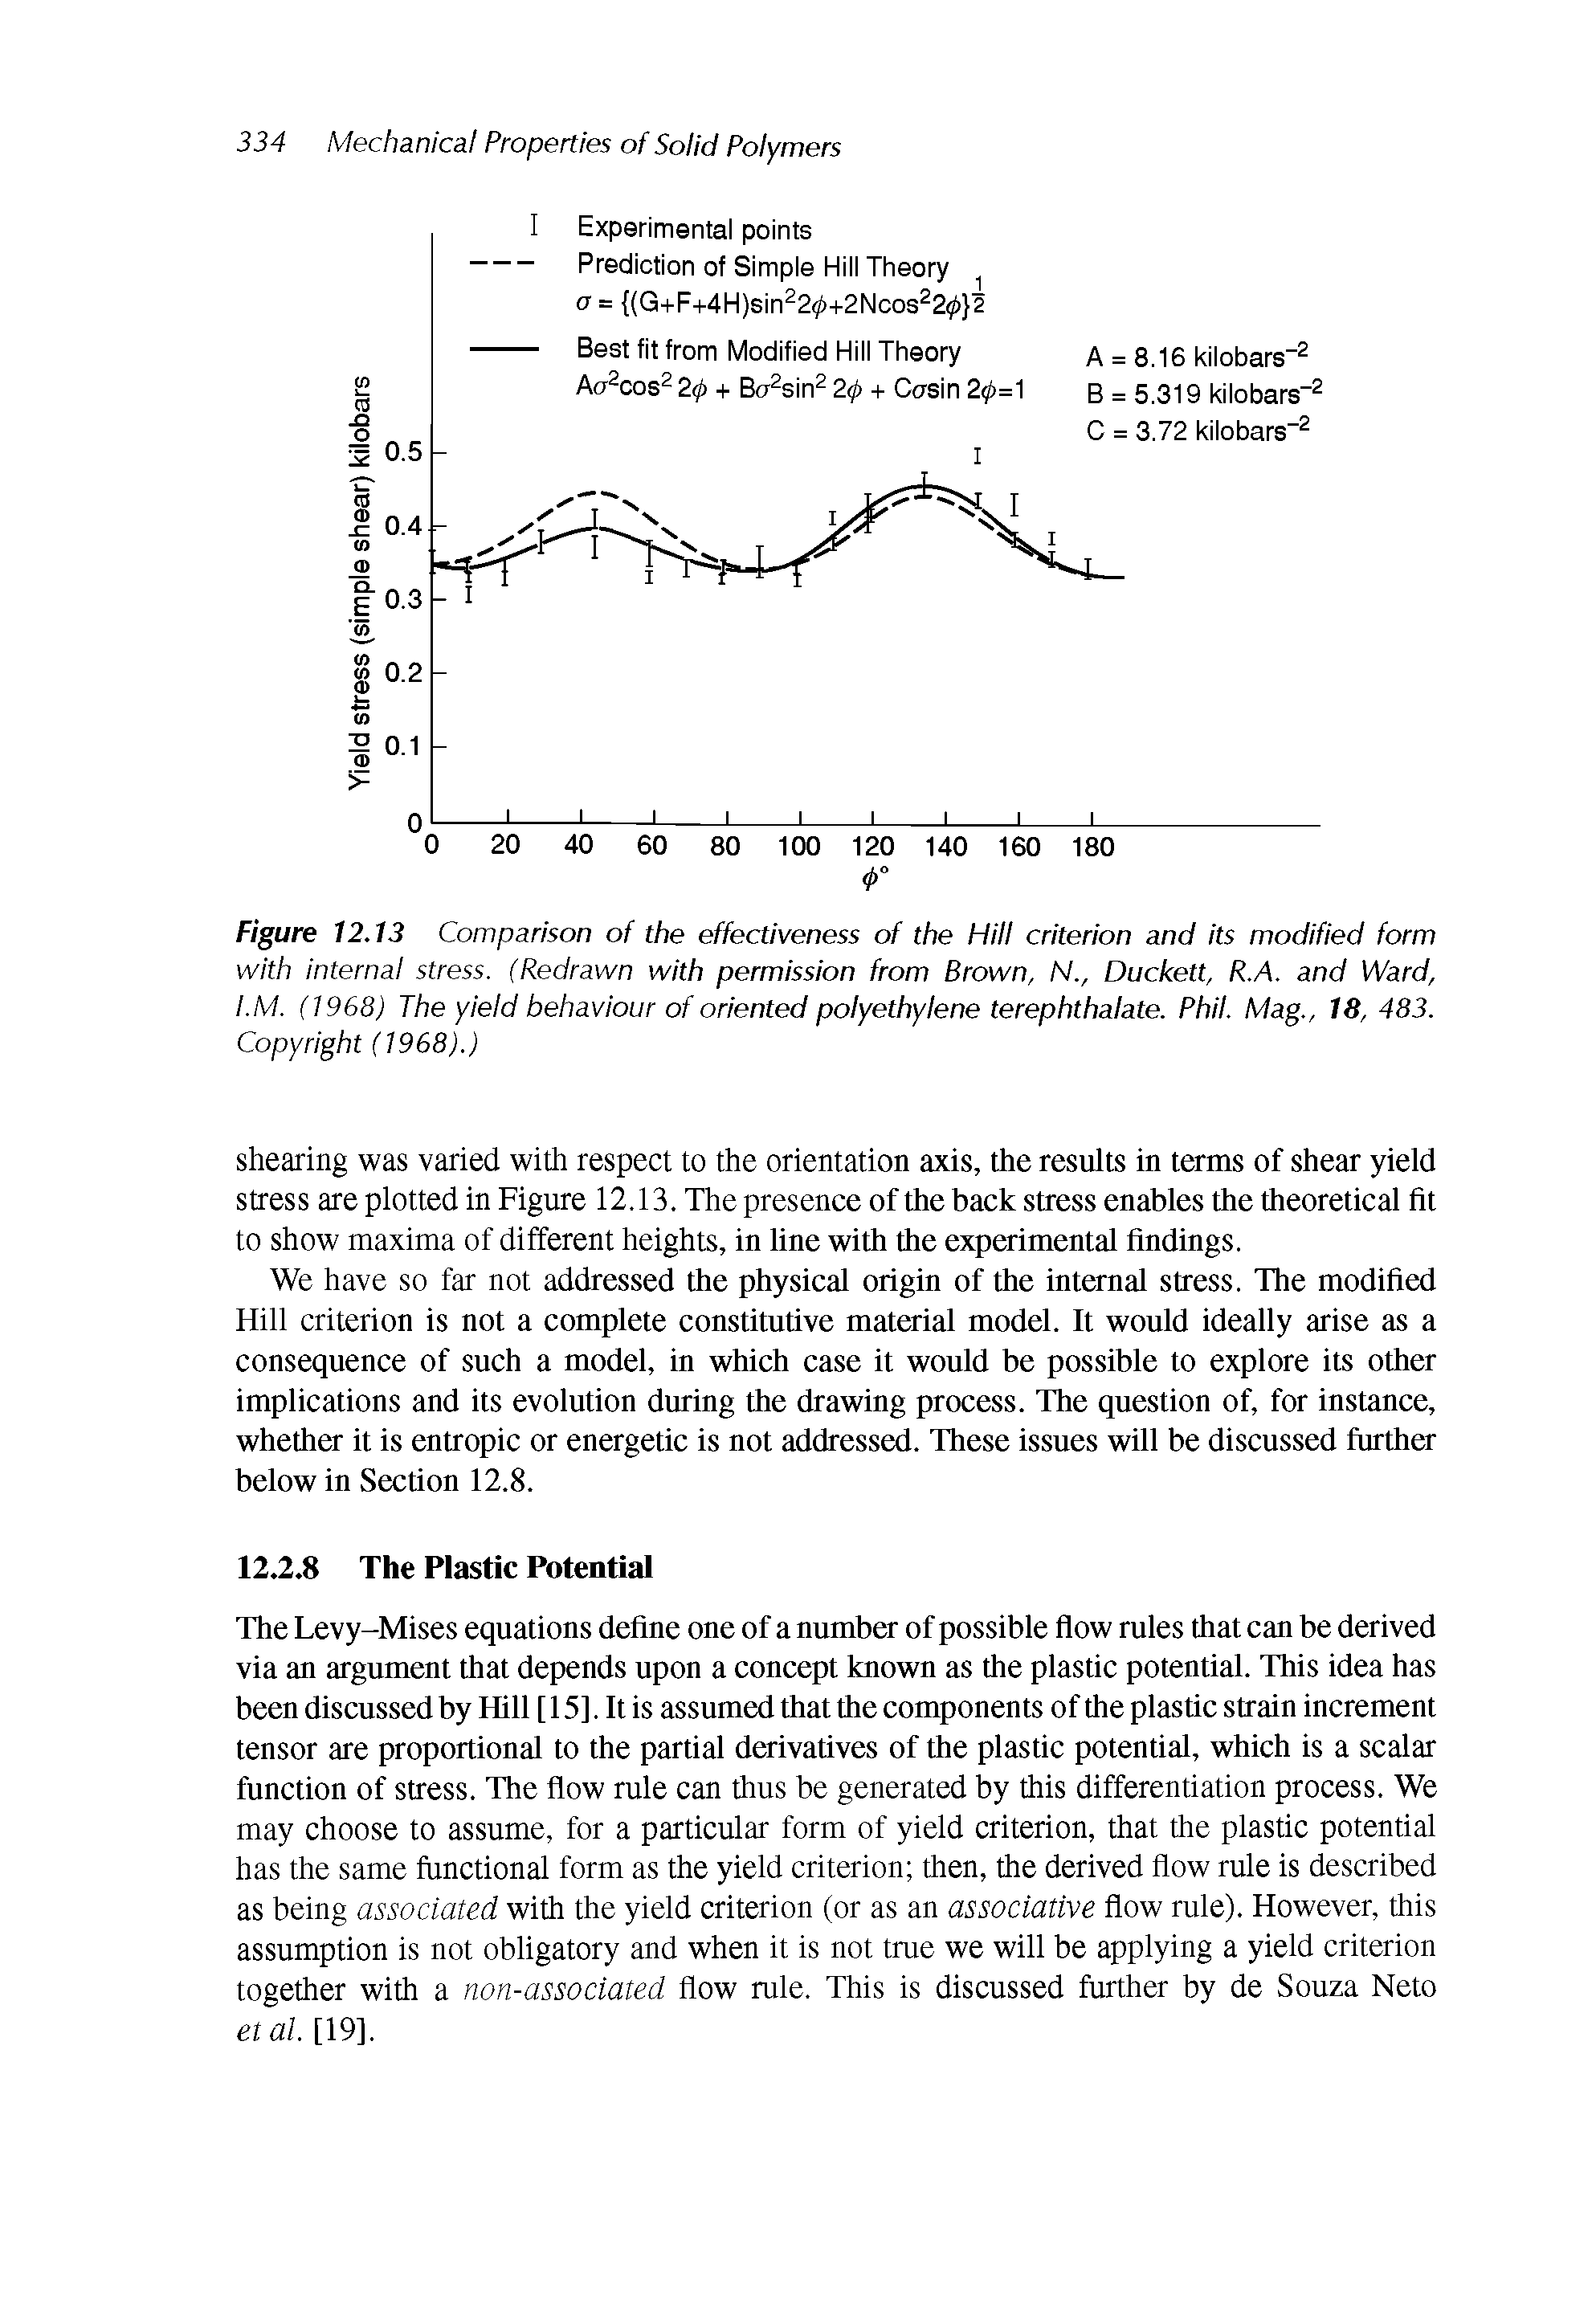 Figure 12.13 Comparison of the effectiveness of the Hill criterion and its modified form with internal stress. (Redrawn with permission from Brown, N., Duckett, R.A. and Ward, I.M. (1968) The yield behaviour of oriented polyethylene terephthalate. Phil. Mag., 18, 483.